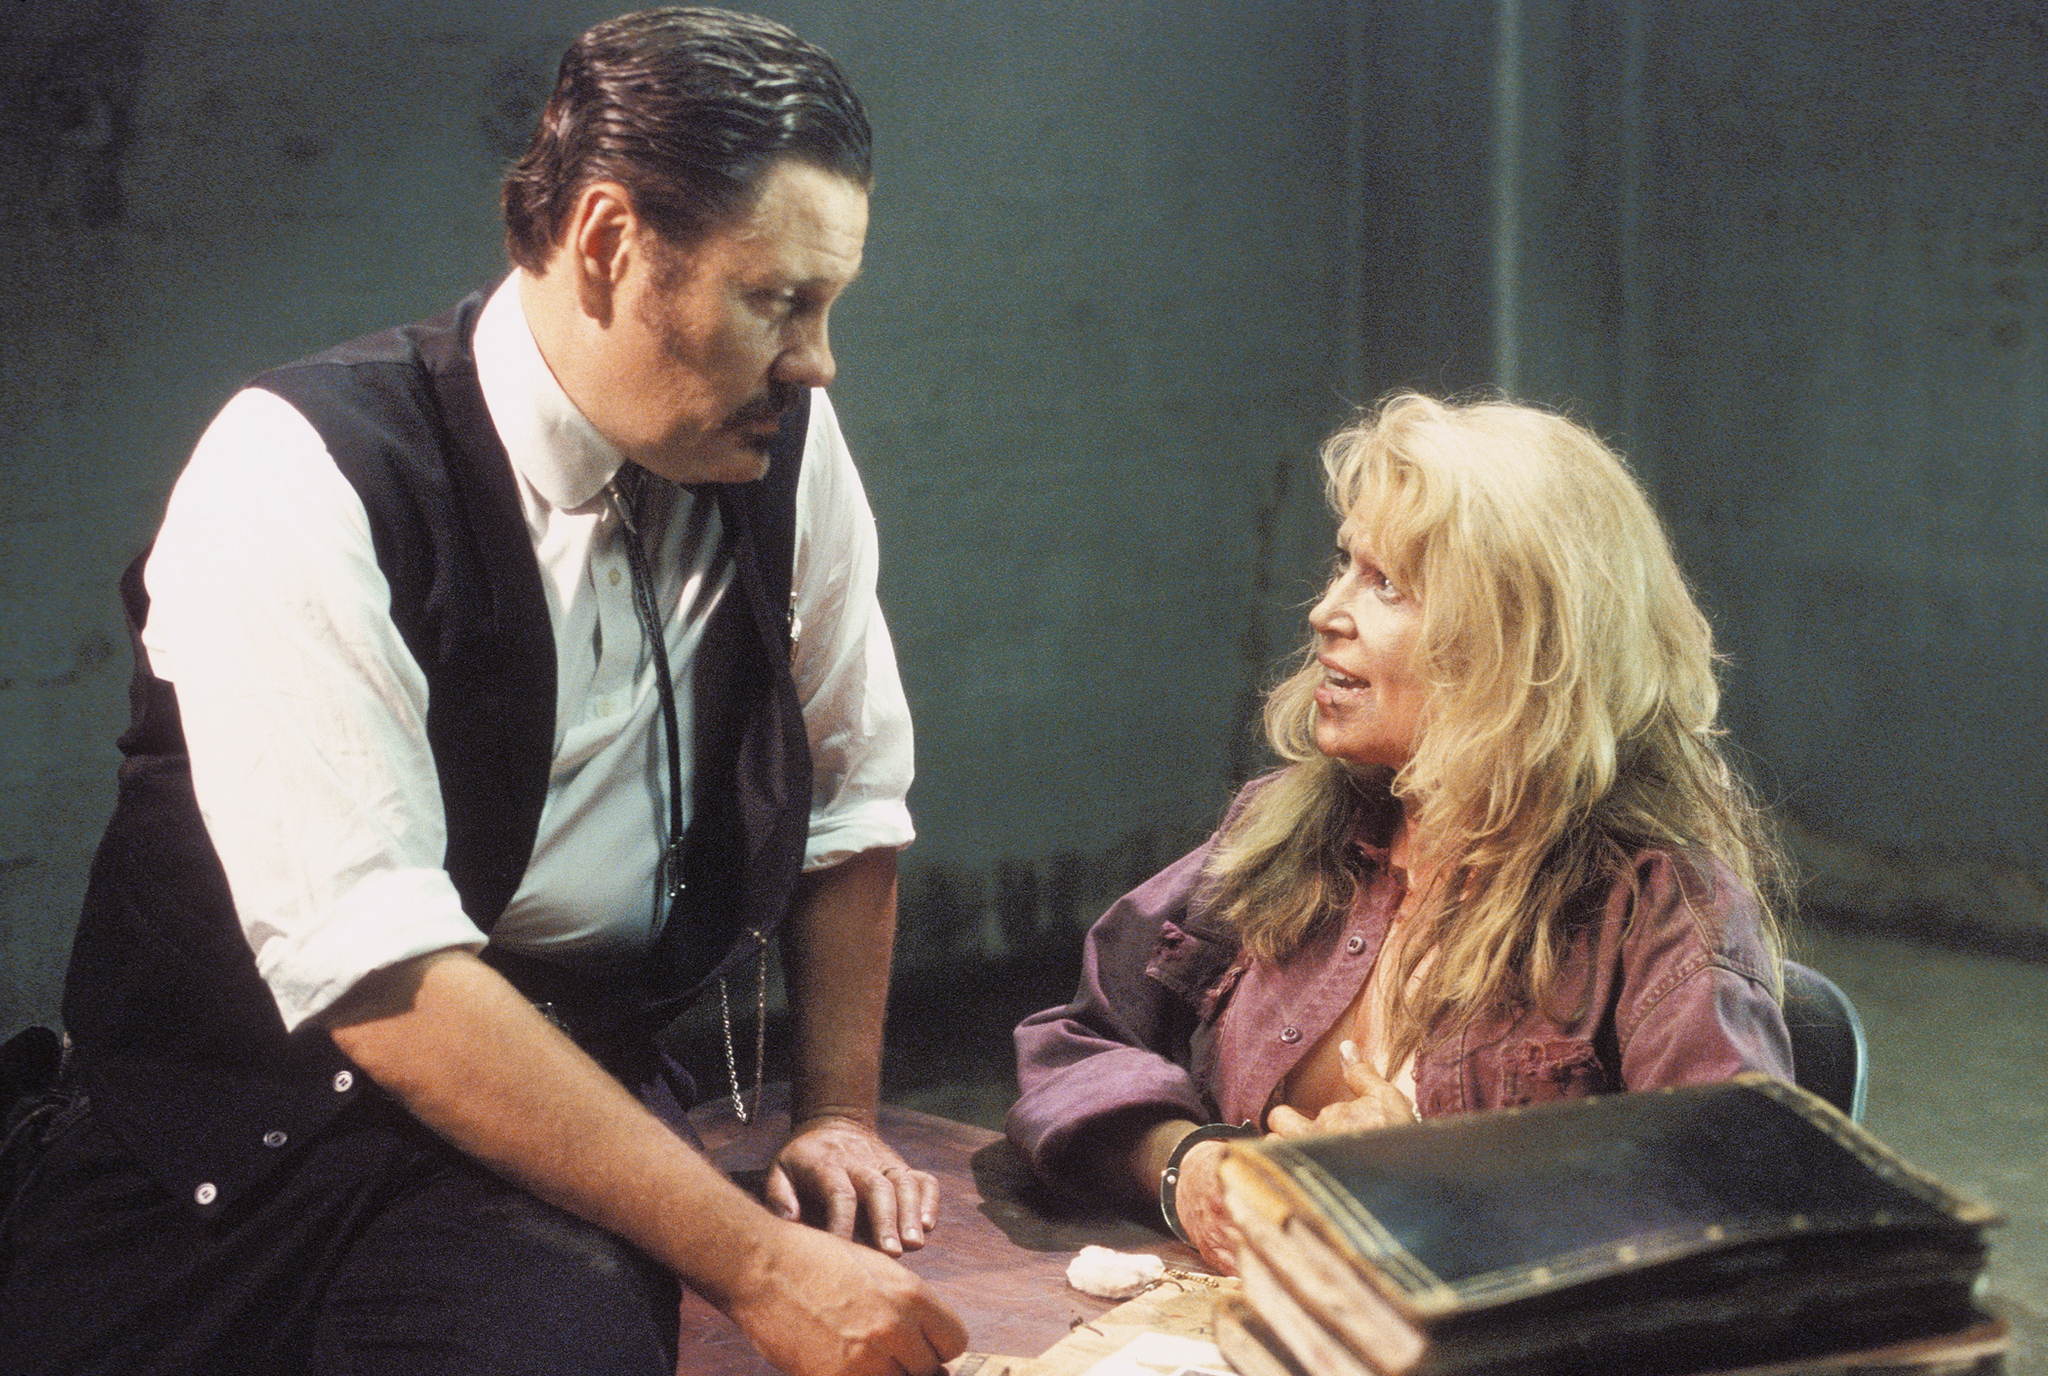 Still of William Forsythe and Leslie Easterbrook in The Devil's Rejects (2005)